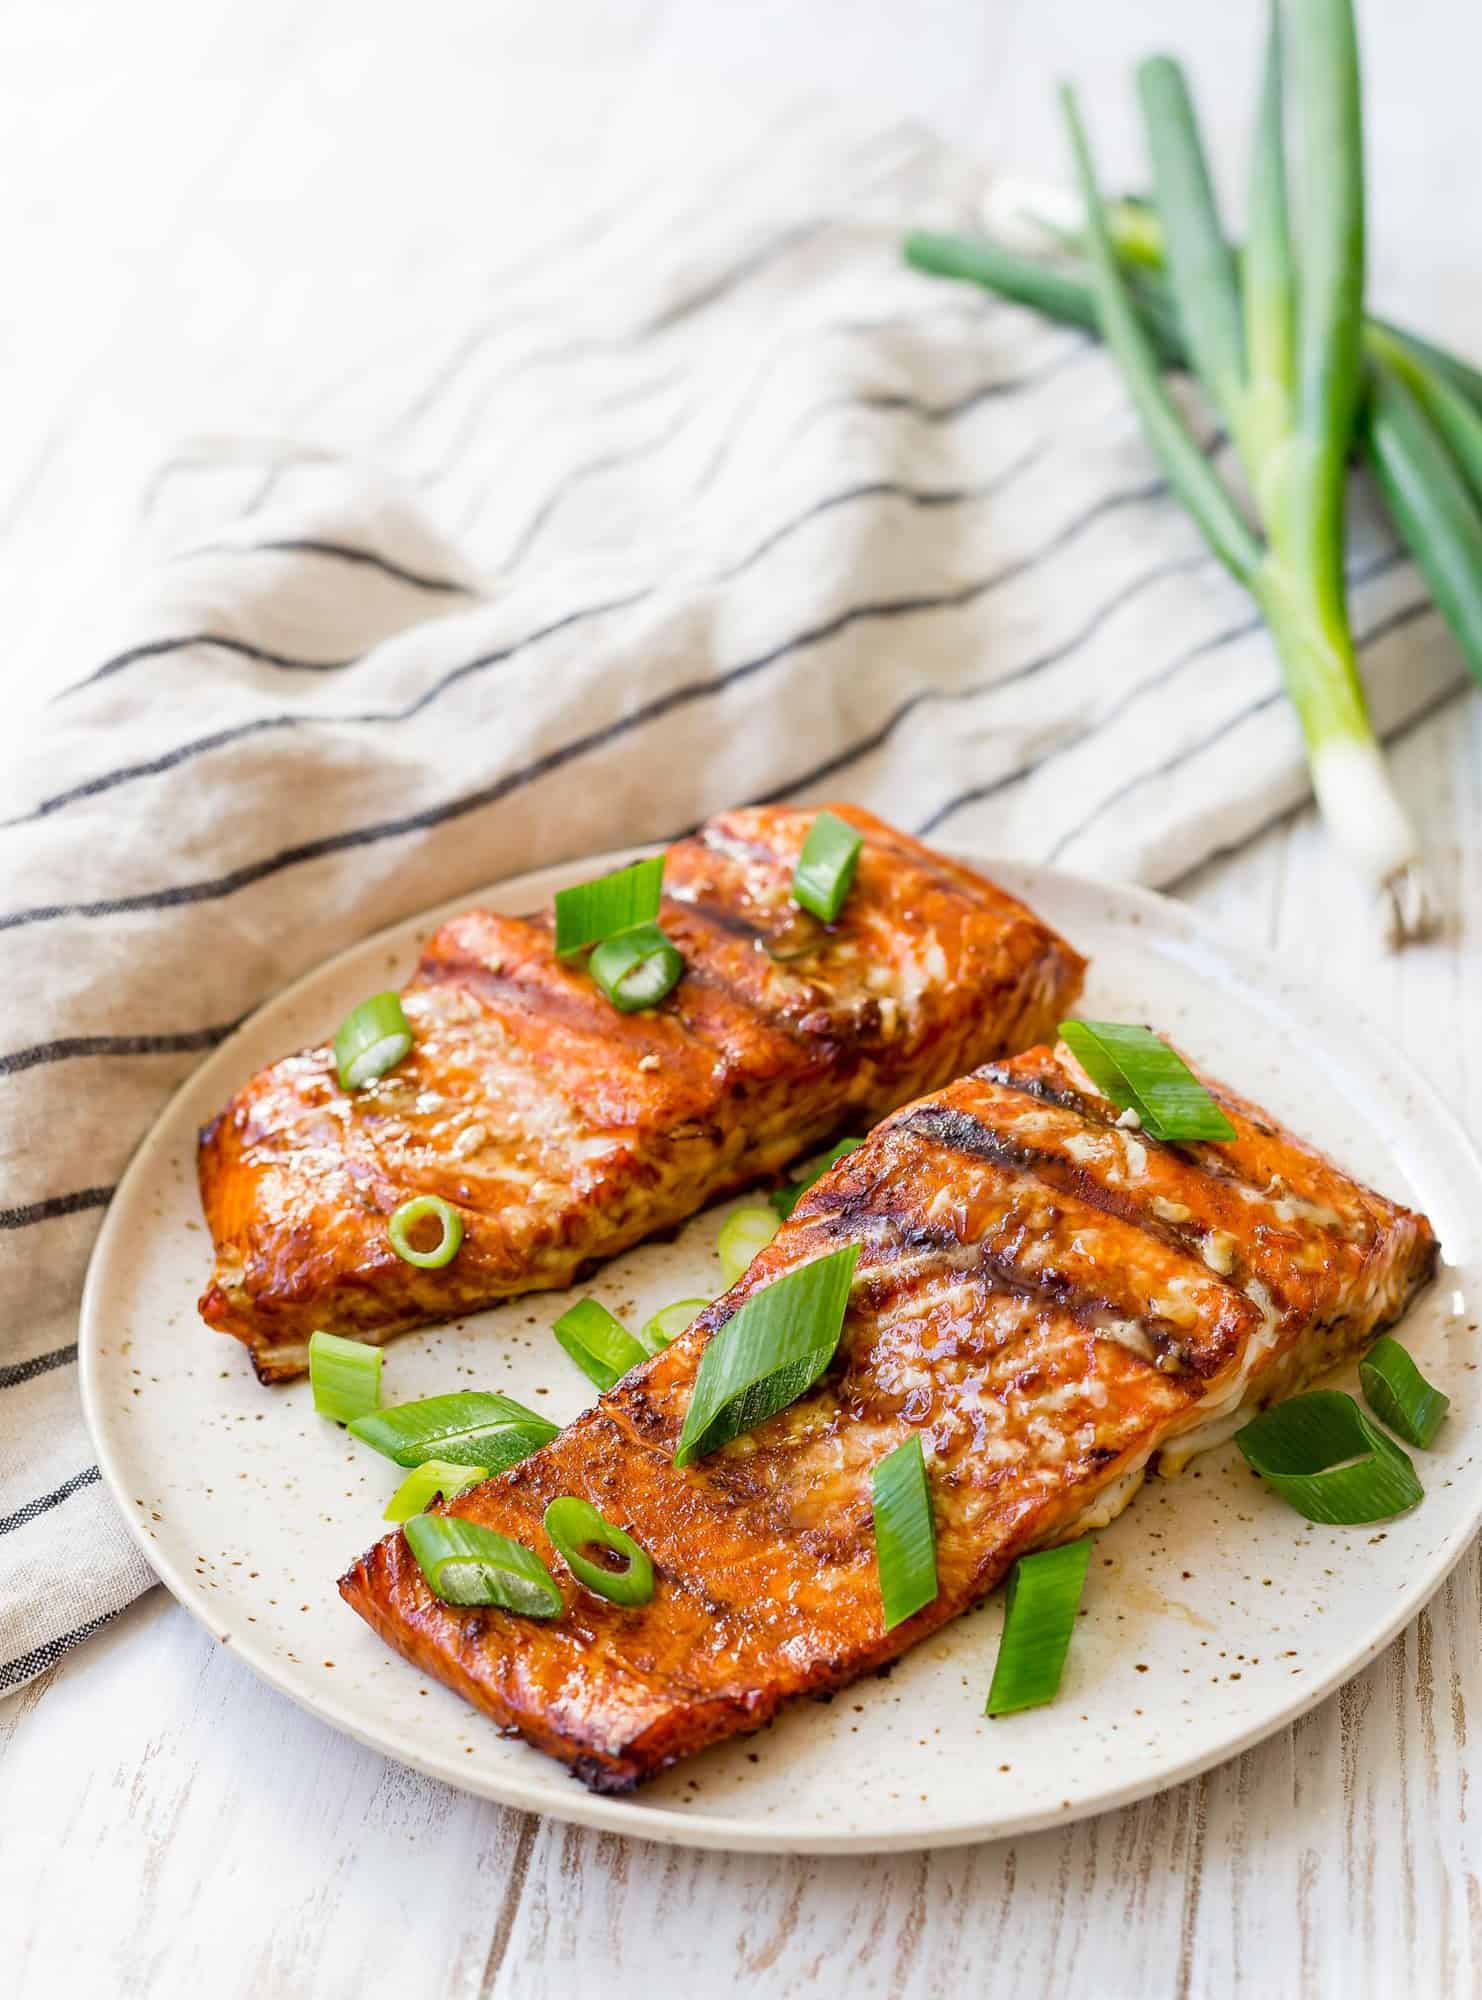 Two fillets of grilled salmon topped with green onion.